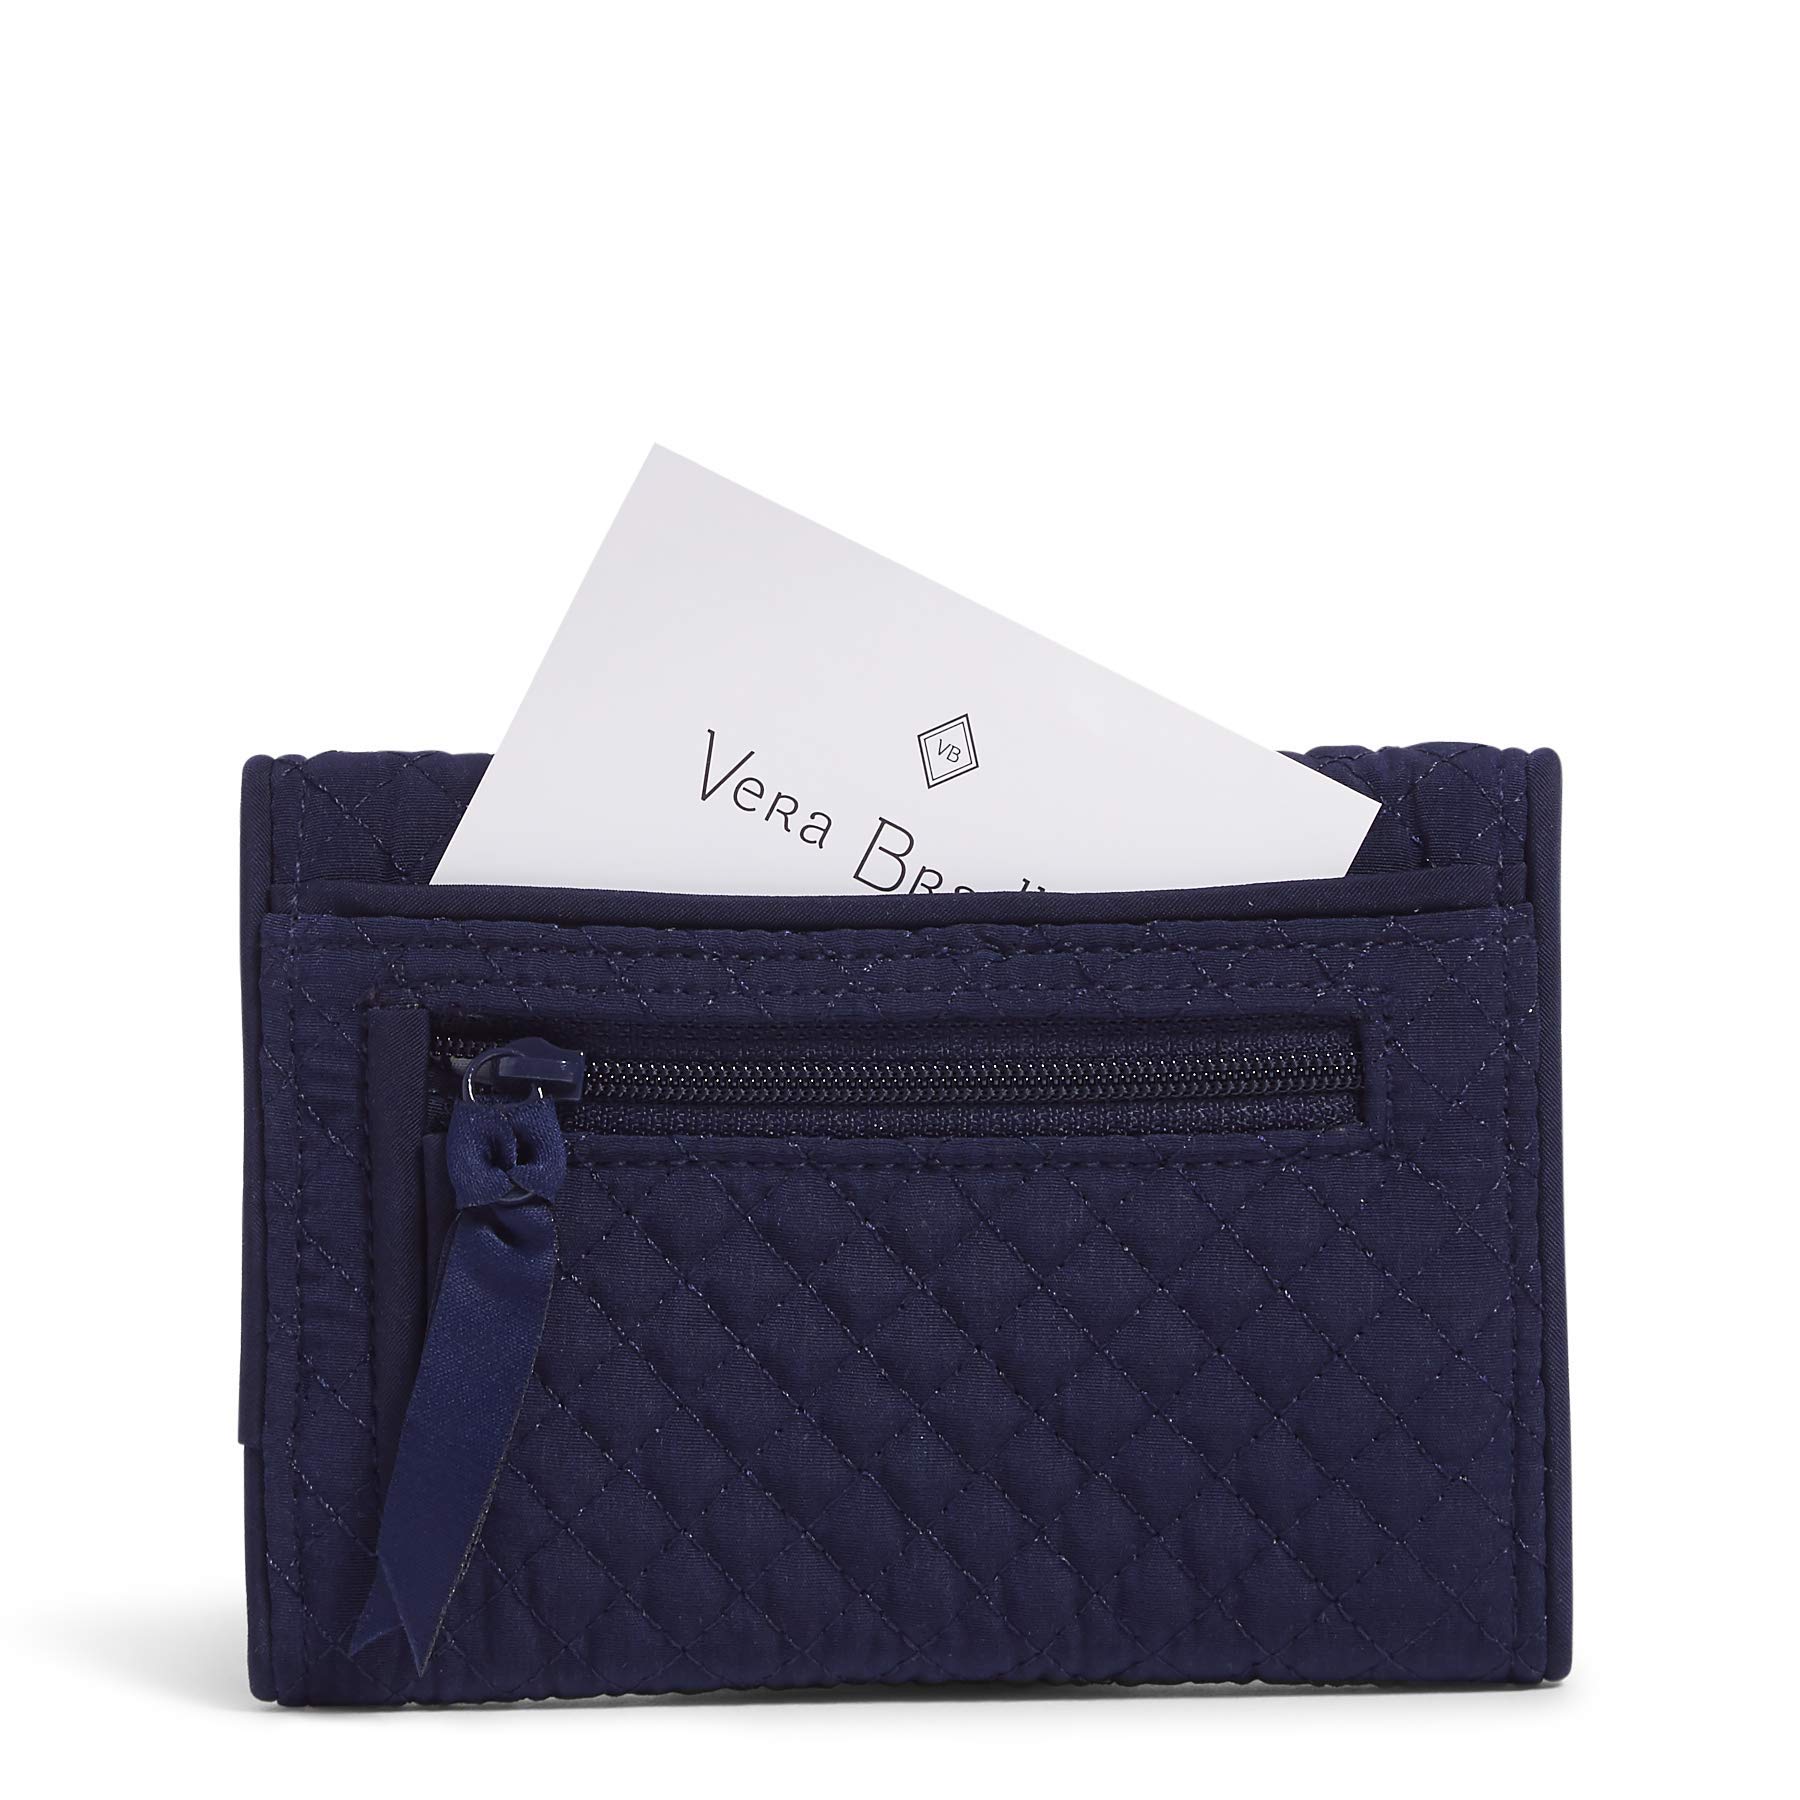 Vera Bradley Women's Protection Microfiber RFID Riley Compact Wallet, Classic Navy, One Size